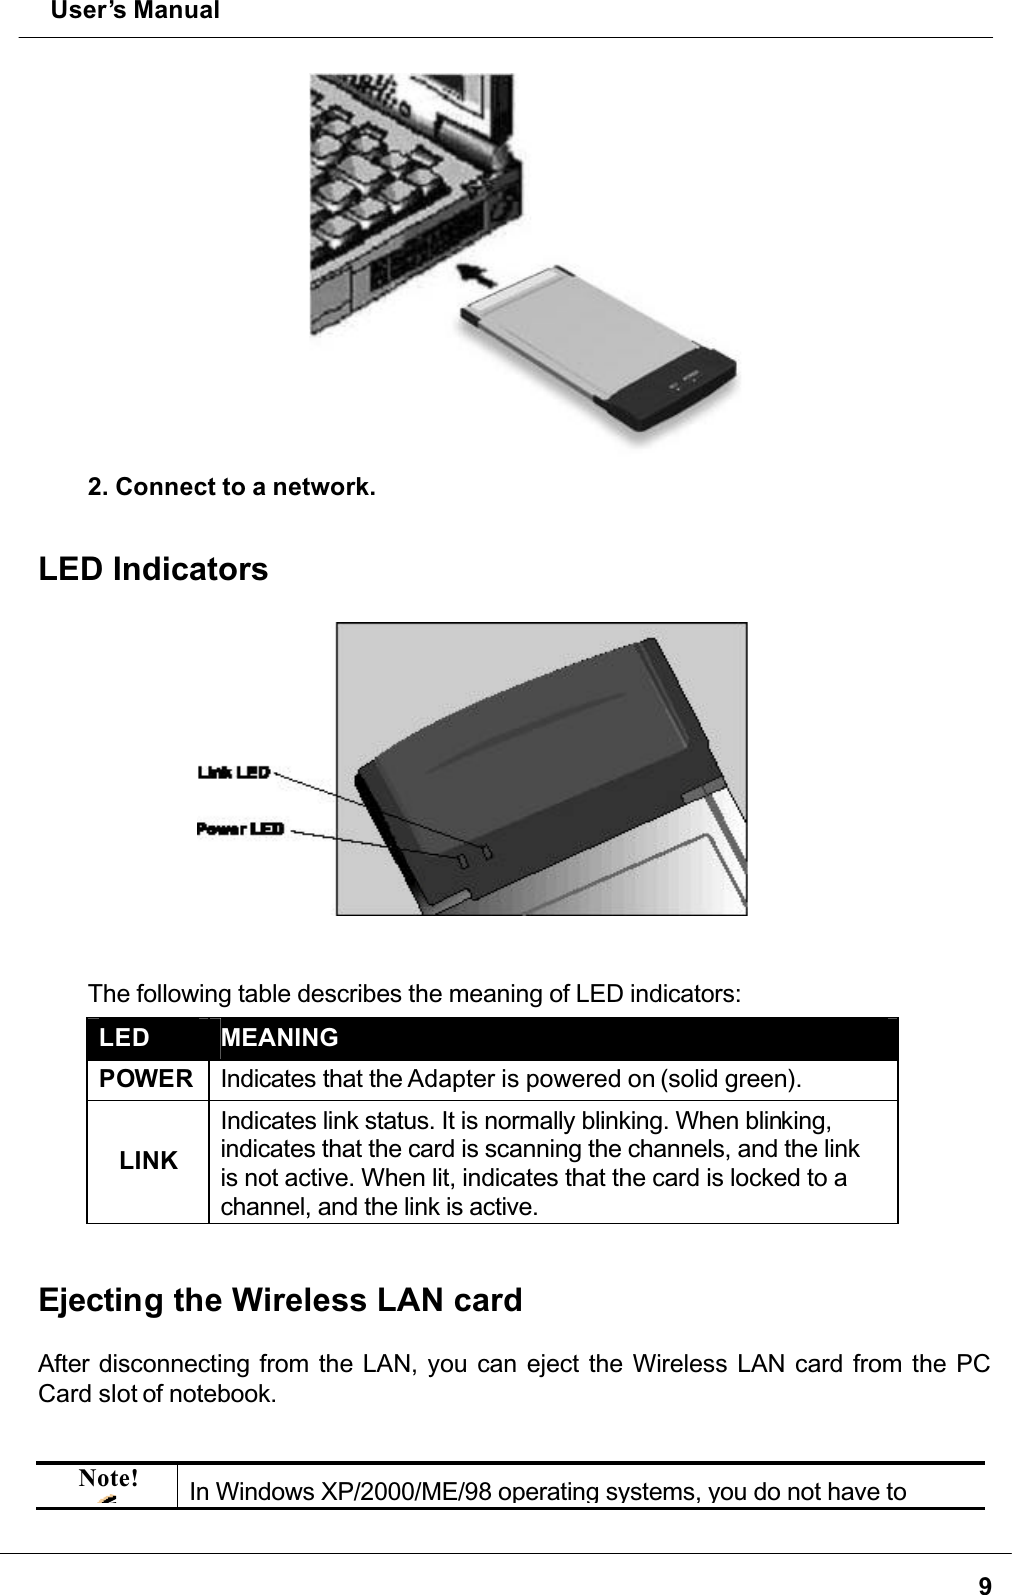  User’s Manual92. Connect to a network.LED IndicatorsThe following table describes the meaning of LED indicators:LED MEANINGPOWER Indicates that the Adapter is powered on (solid green).LINKIndicates link status. It is normally blinking. When blinking,indicates that the card is scanning the channels, and the link is not active. When lit, indicates that the card is locked to a channel, and the link is active. Ejecting the Wireless LAN cardAfter disconnecting from the LAN, you can eject the Wireless LAN card from the PC Card slot of notebook.Note! In Windows XP/2000/ME/98 operating systems, you do not have to 